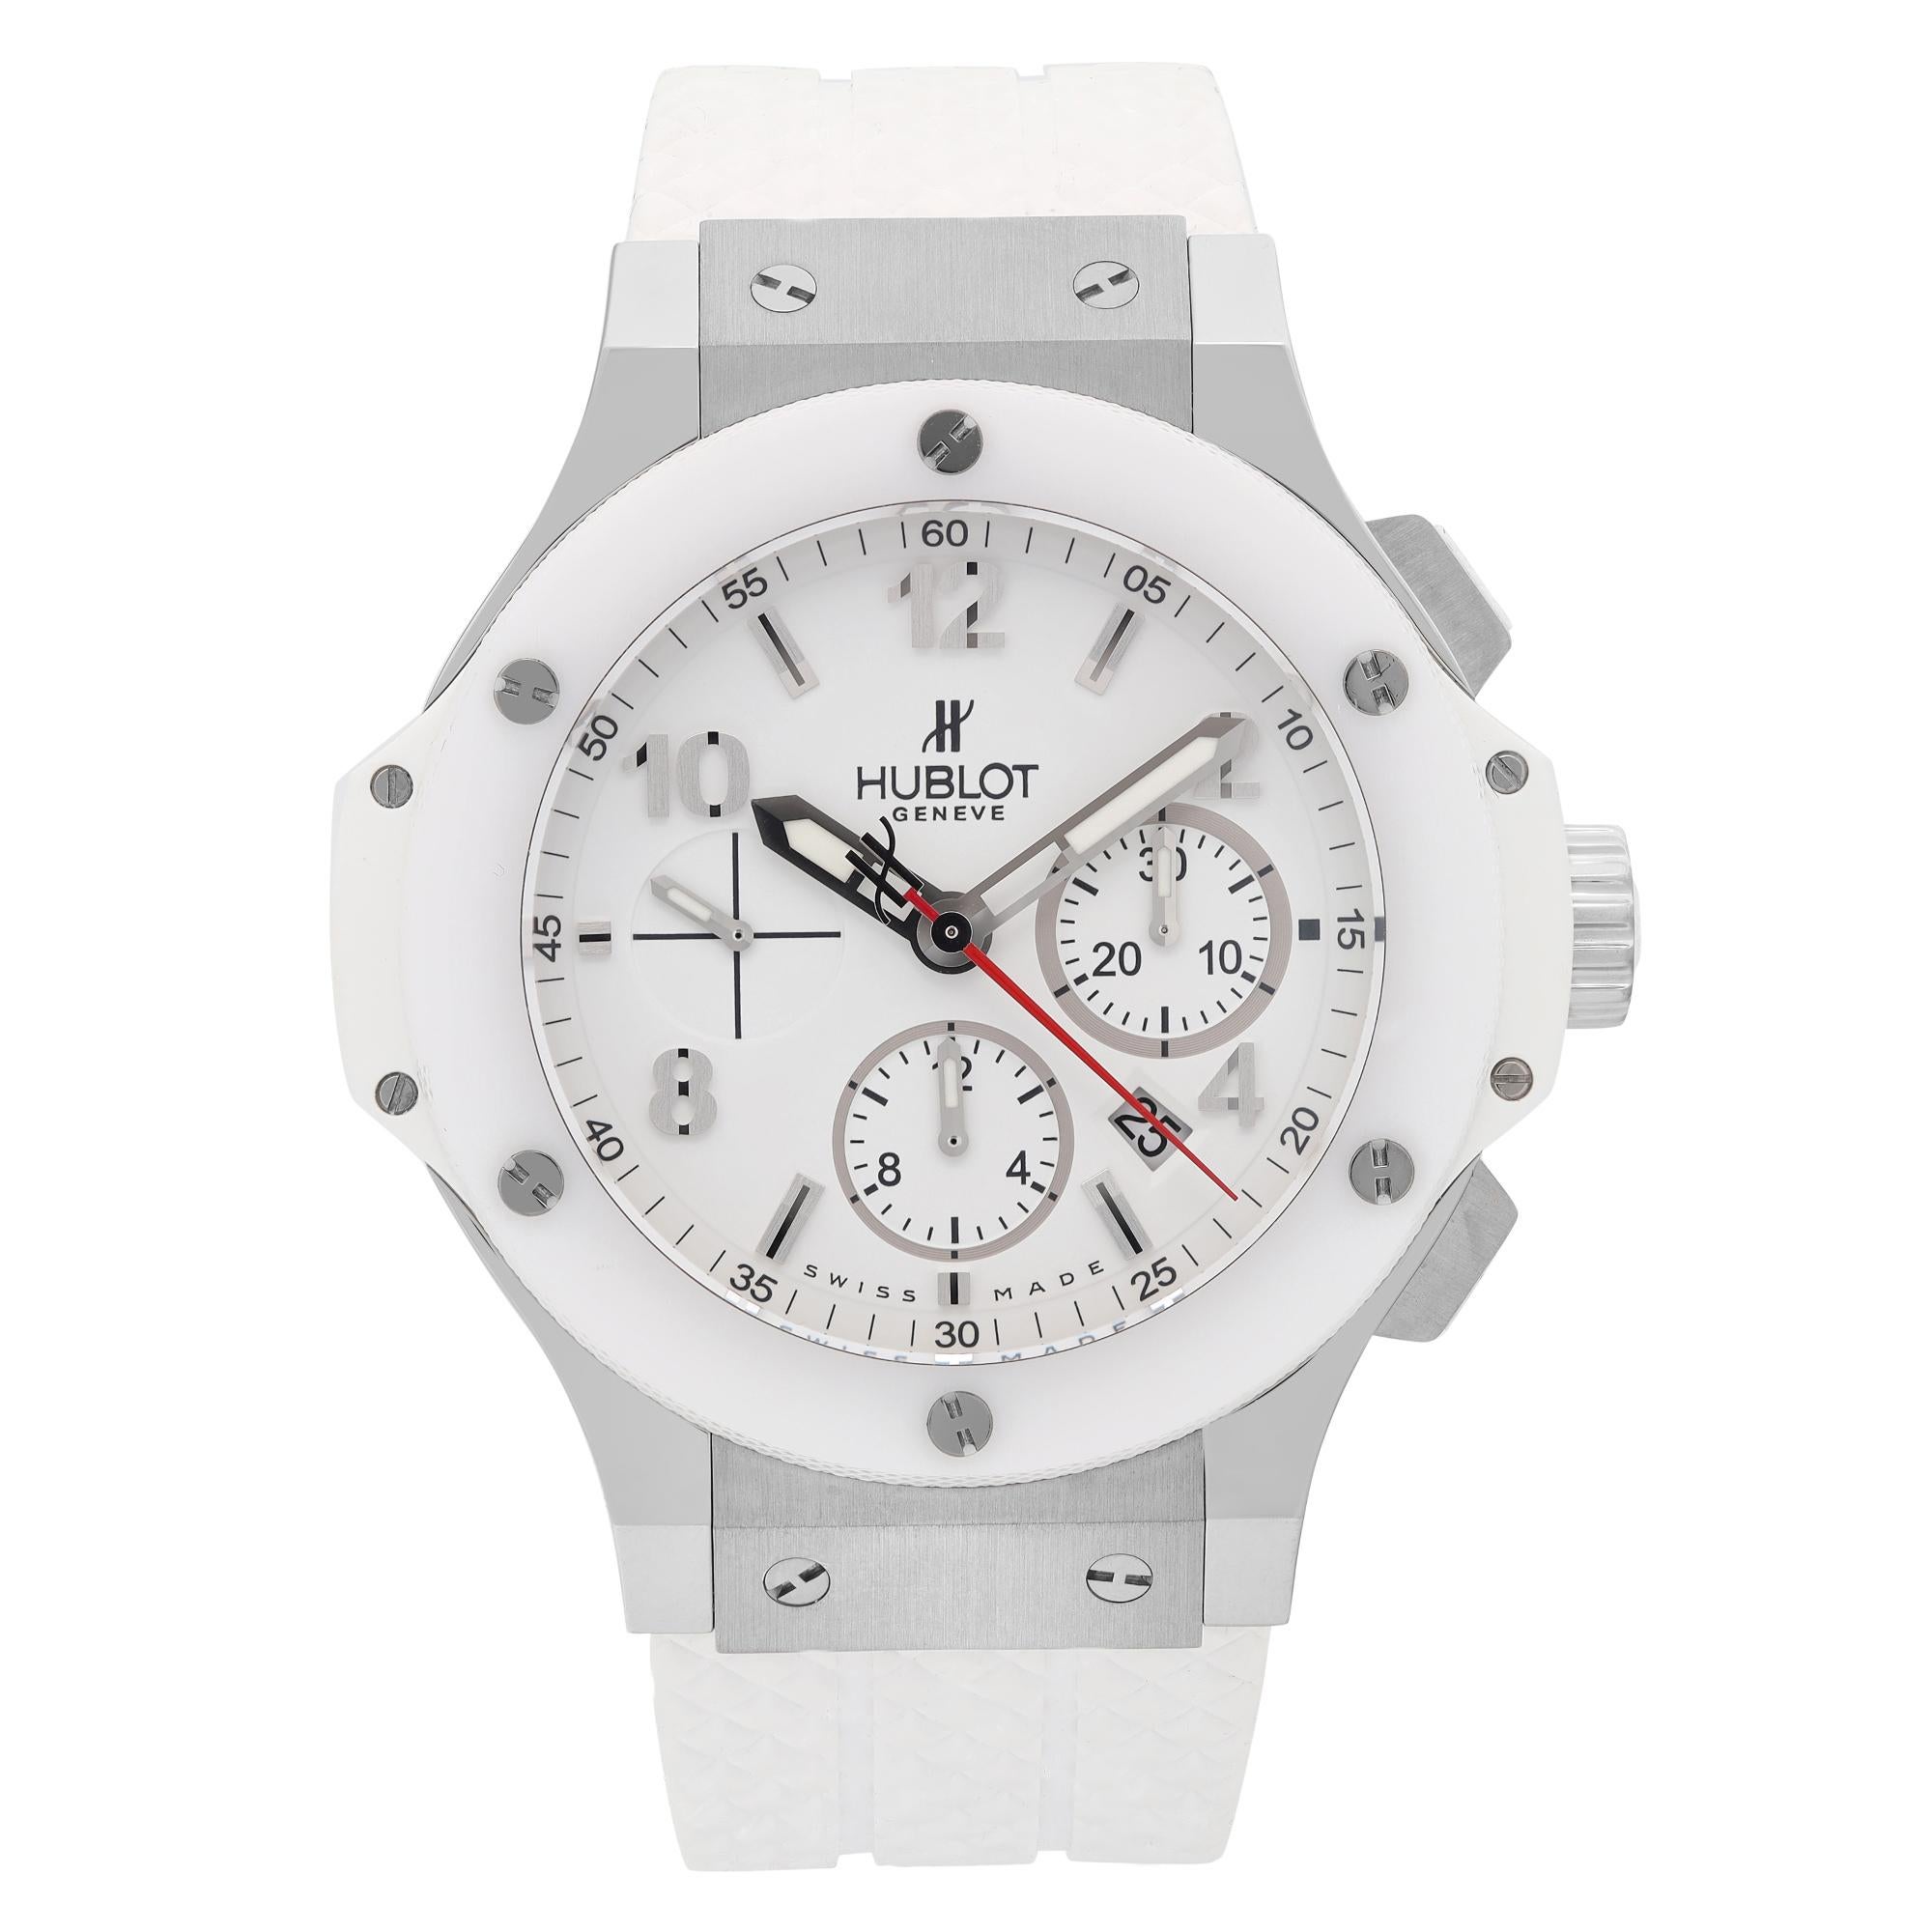 Store Display Model. Can have minor blemishes Comes with an original box and an open Warranty Card. 

 Brand: Hublot  Type: Wristwatch  Department: Men  Model Number: 301.SE.230.RW  Country/Region of Manufacture: Switzerland  Style: Luxury  Model: